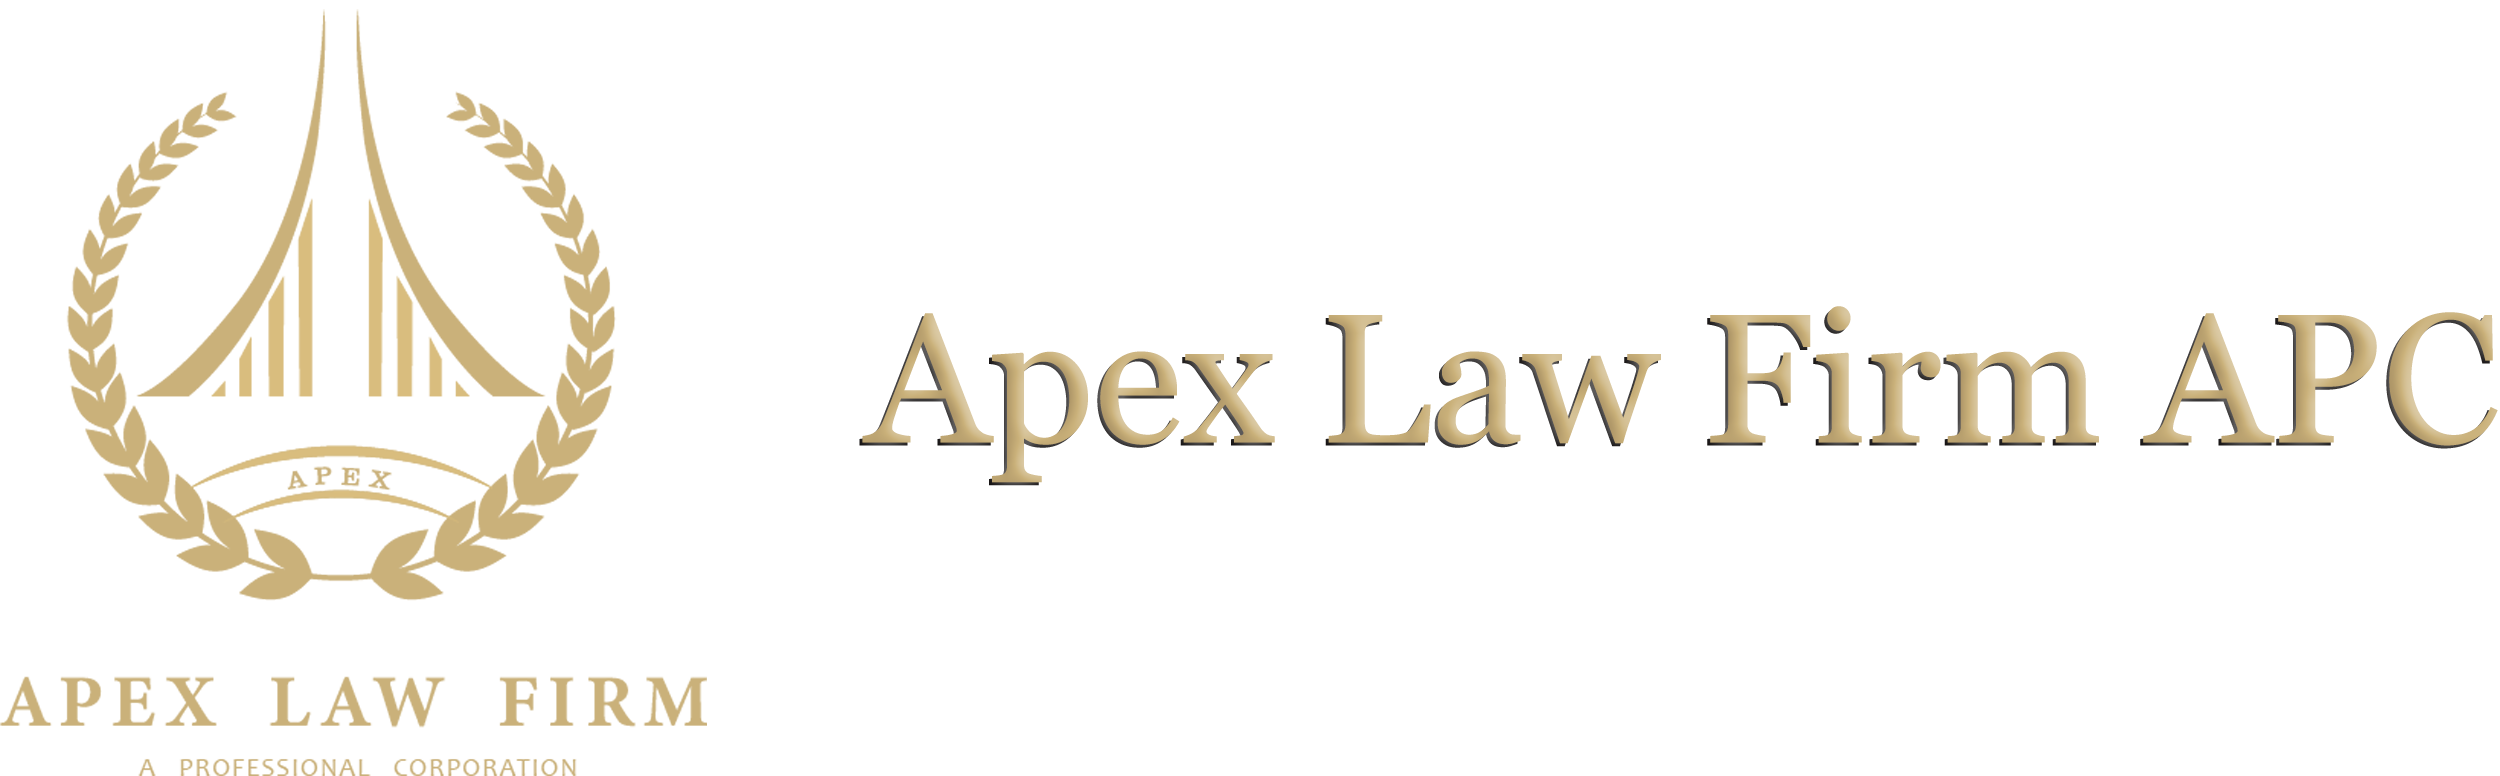 Business logo of Apex Law Firm APC